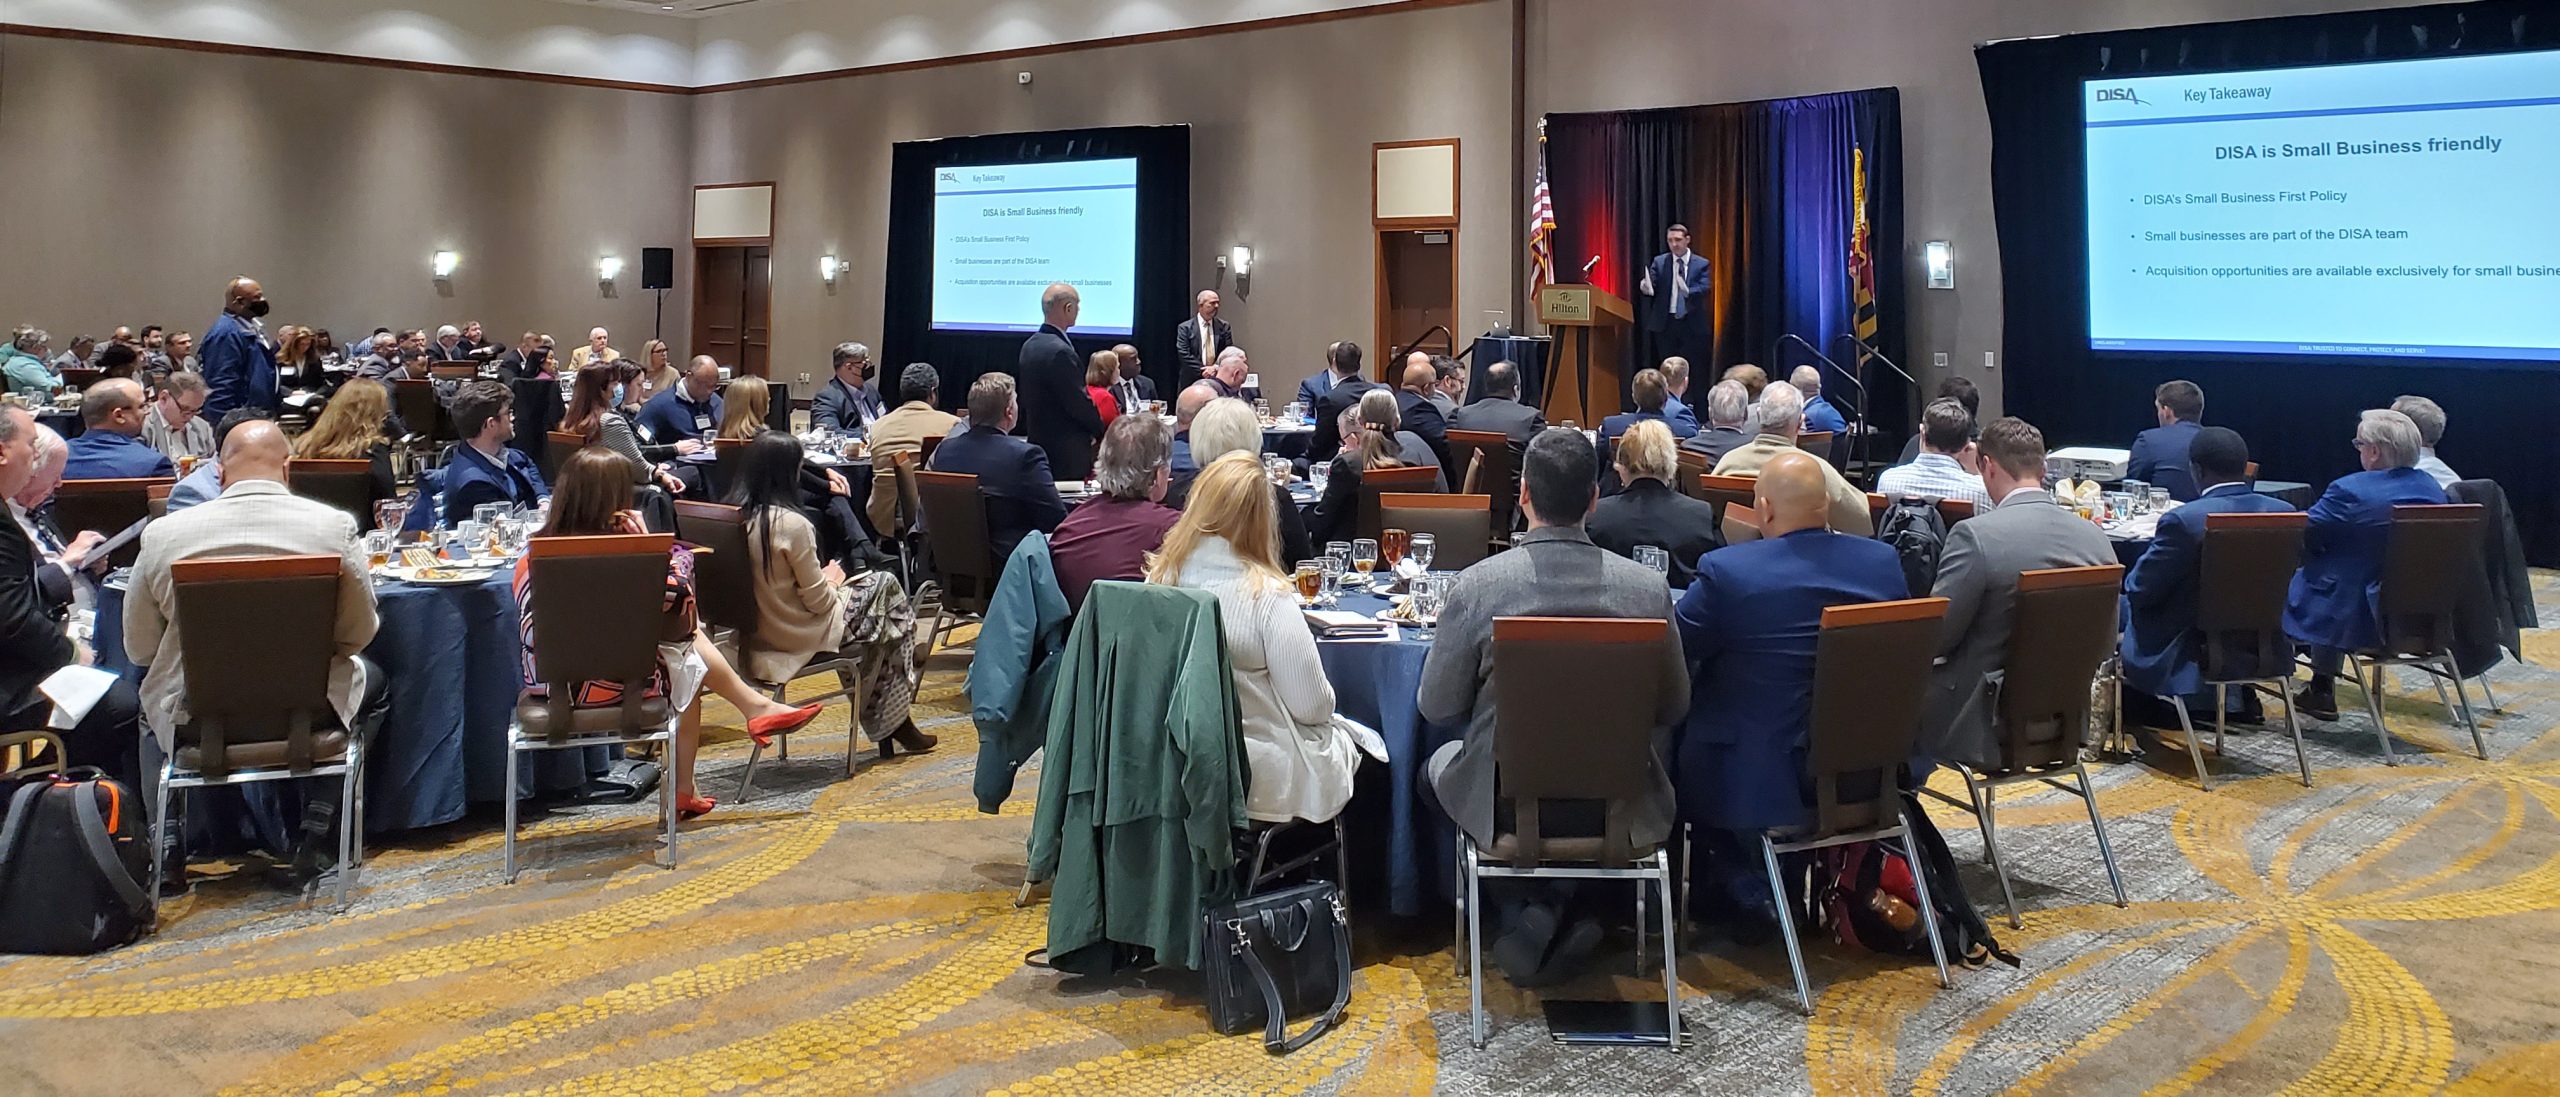 Attendees Applaud Program Content at DISA Small Business Conference